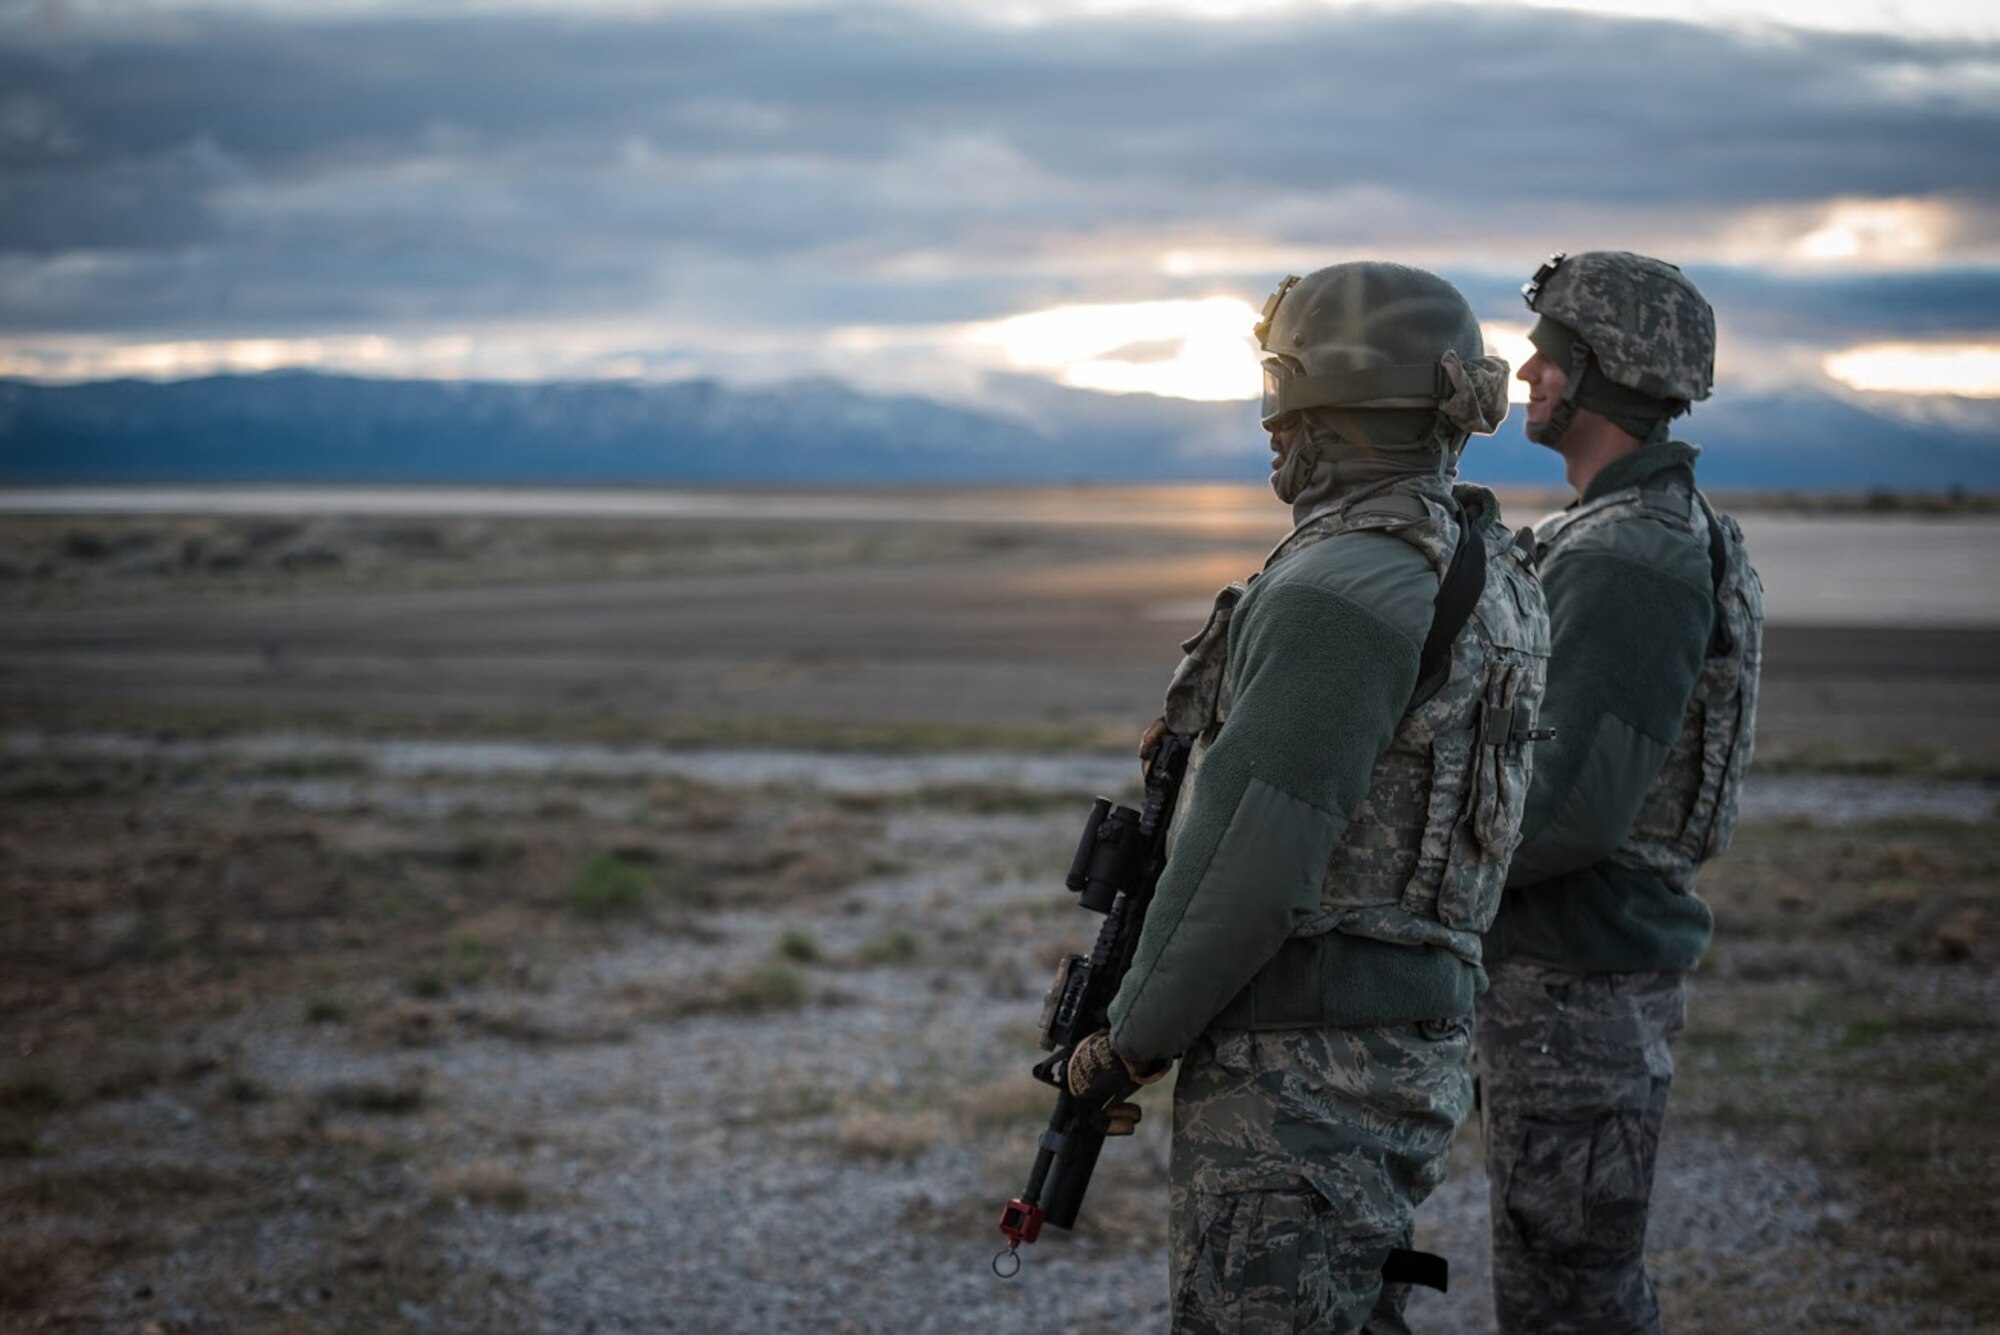 Airmen from the Kentucky Air National Guard’s 123rd Contingency Response Group keep watch over the flight line at Amedee Army Airfield, Calif., on March 7, 2016. The 123rd CRG is working in conjunction with the U.S. Army’s 688th Rapid Port Opening Element and a team from the Defense Logistics Agency to operate Joint Task Force-Port Opening Sangala during a week-long exercise called Operation Lumberjack. The objective of the JTF-PO is to establish an aerial port of debarkation, provide initial distribution capability and set up warehousing for distribution beyond a forward node. (Kentucky Air National Guard photo by Master Sgt. Phil Speck)